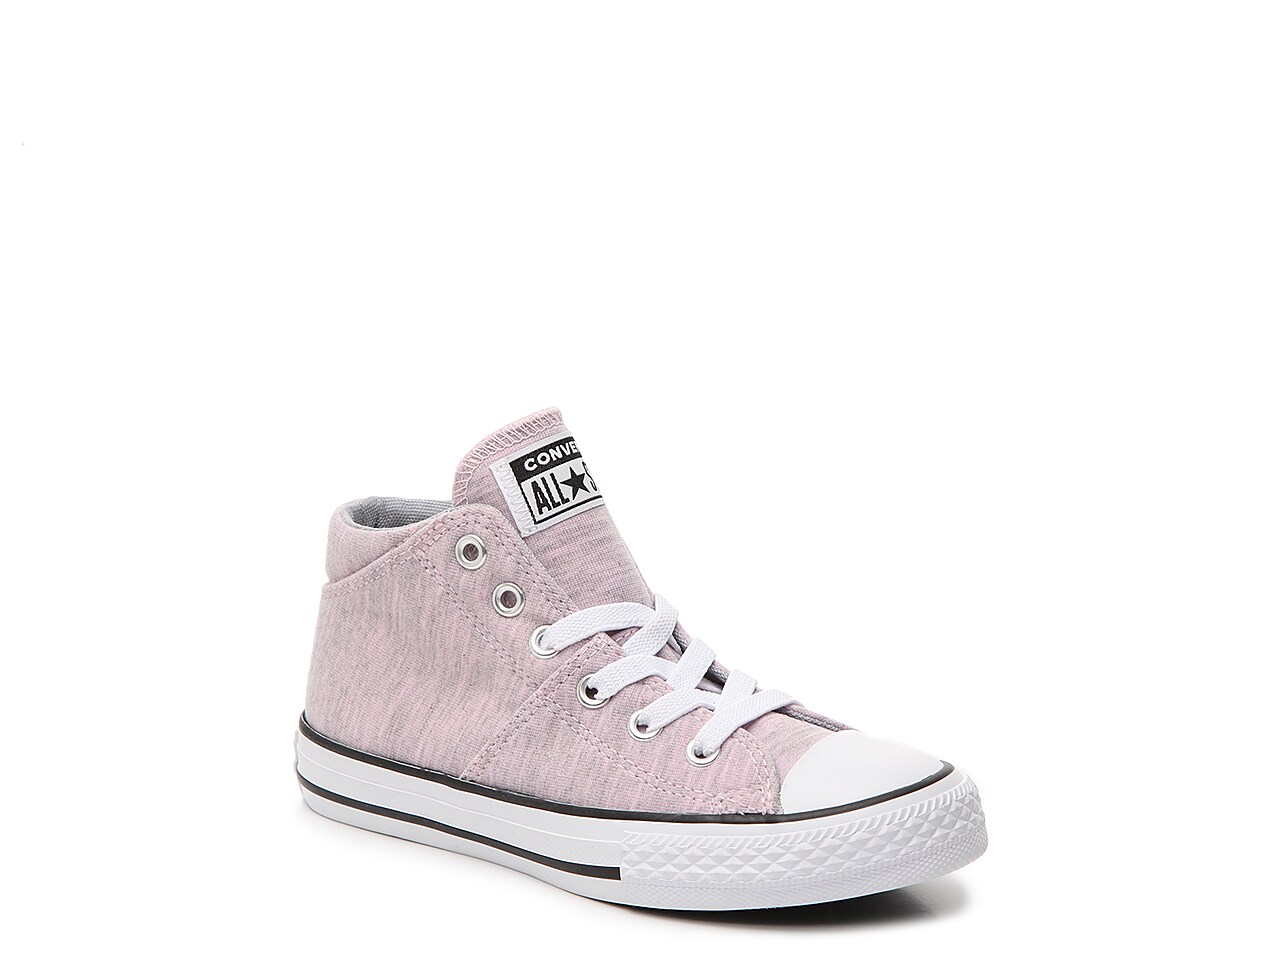 Converse chuck taylor all star madison girls sneakers little kids Converse Chuck Taylor All Star Madison Mid Top Sneaker Kids Dsw